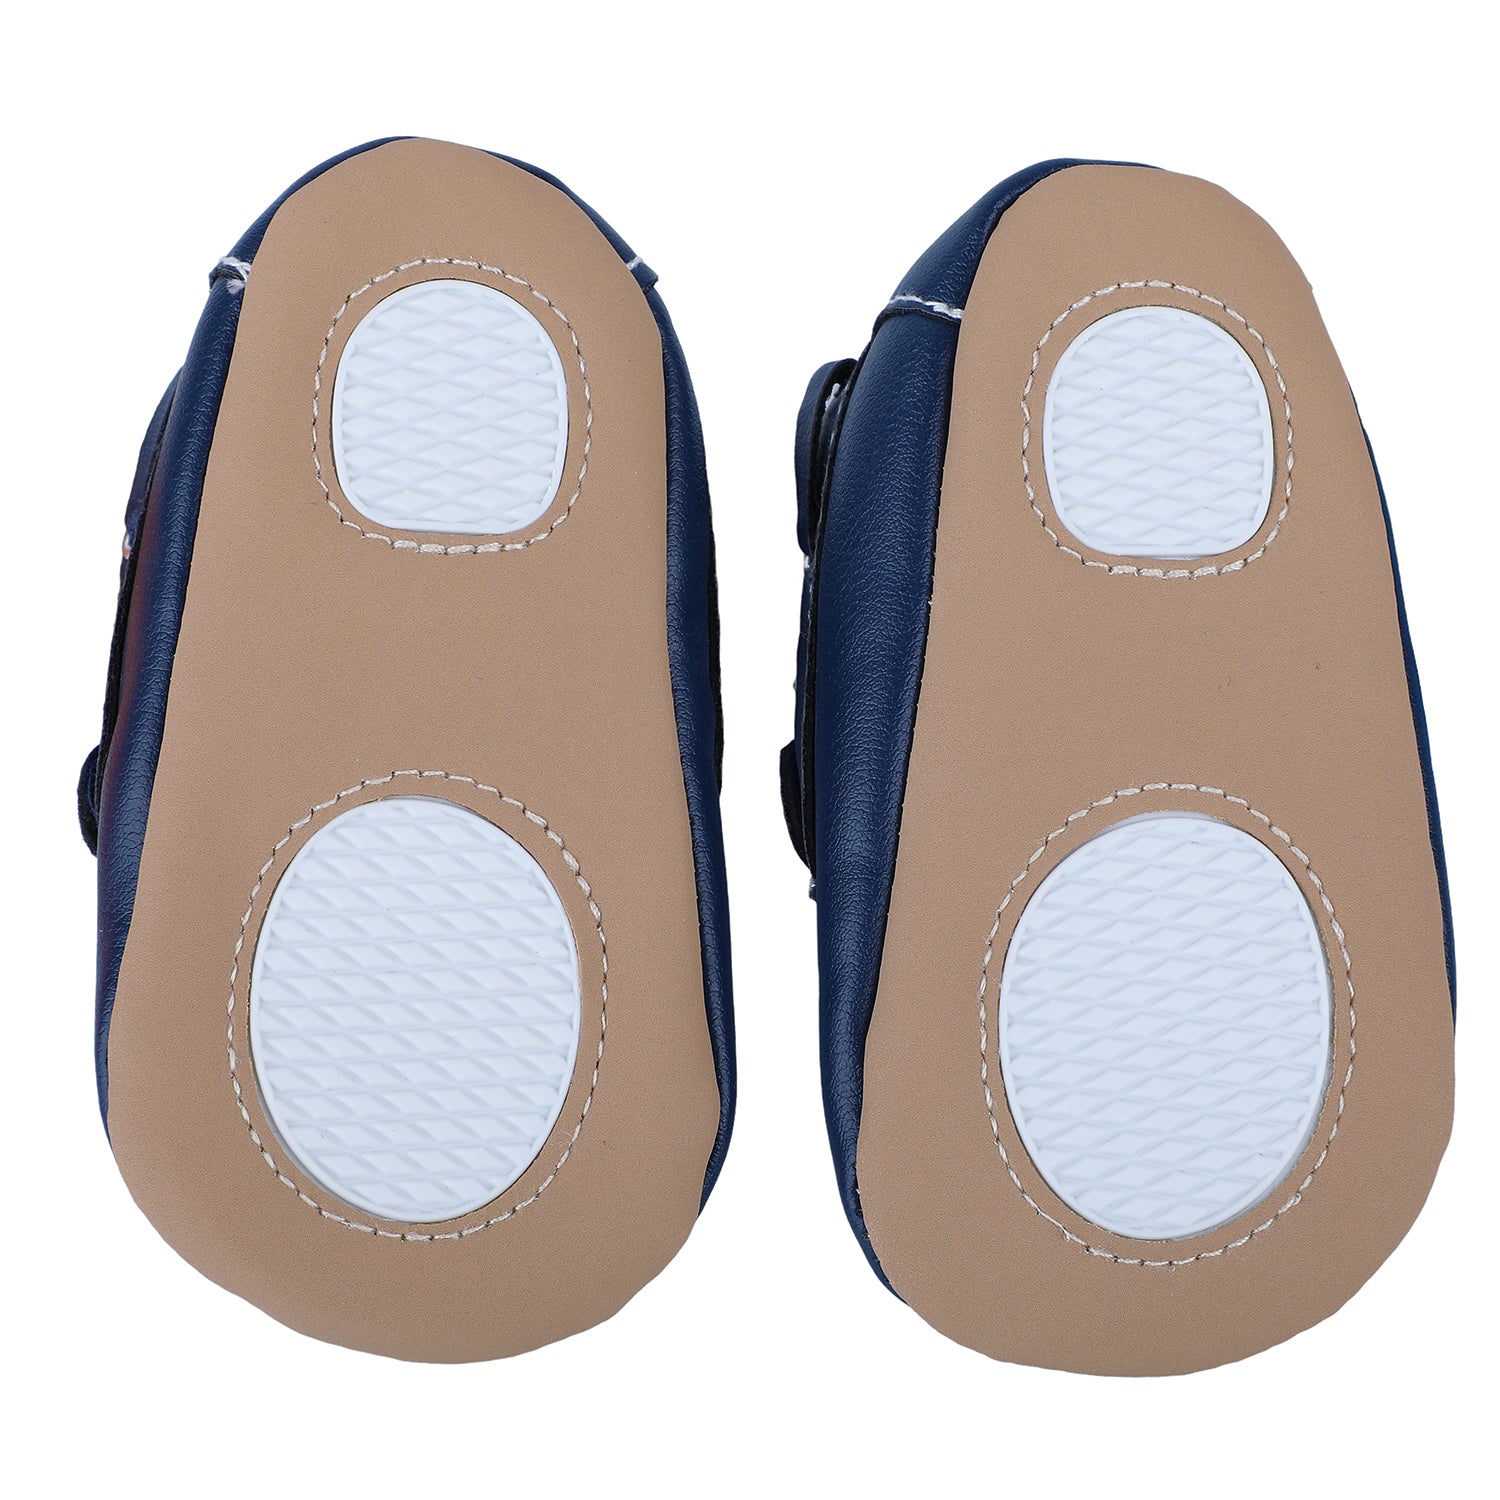 Solid Hookloop Stylish Leather Velcro Shoes - Navy Blue - Baby Moo